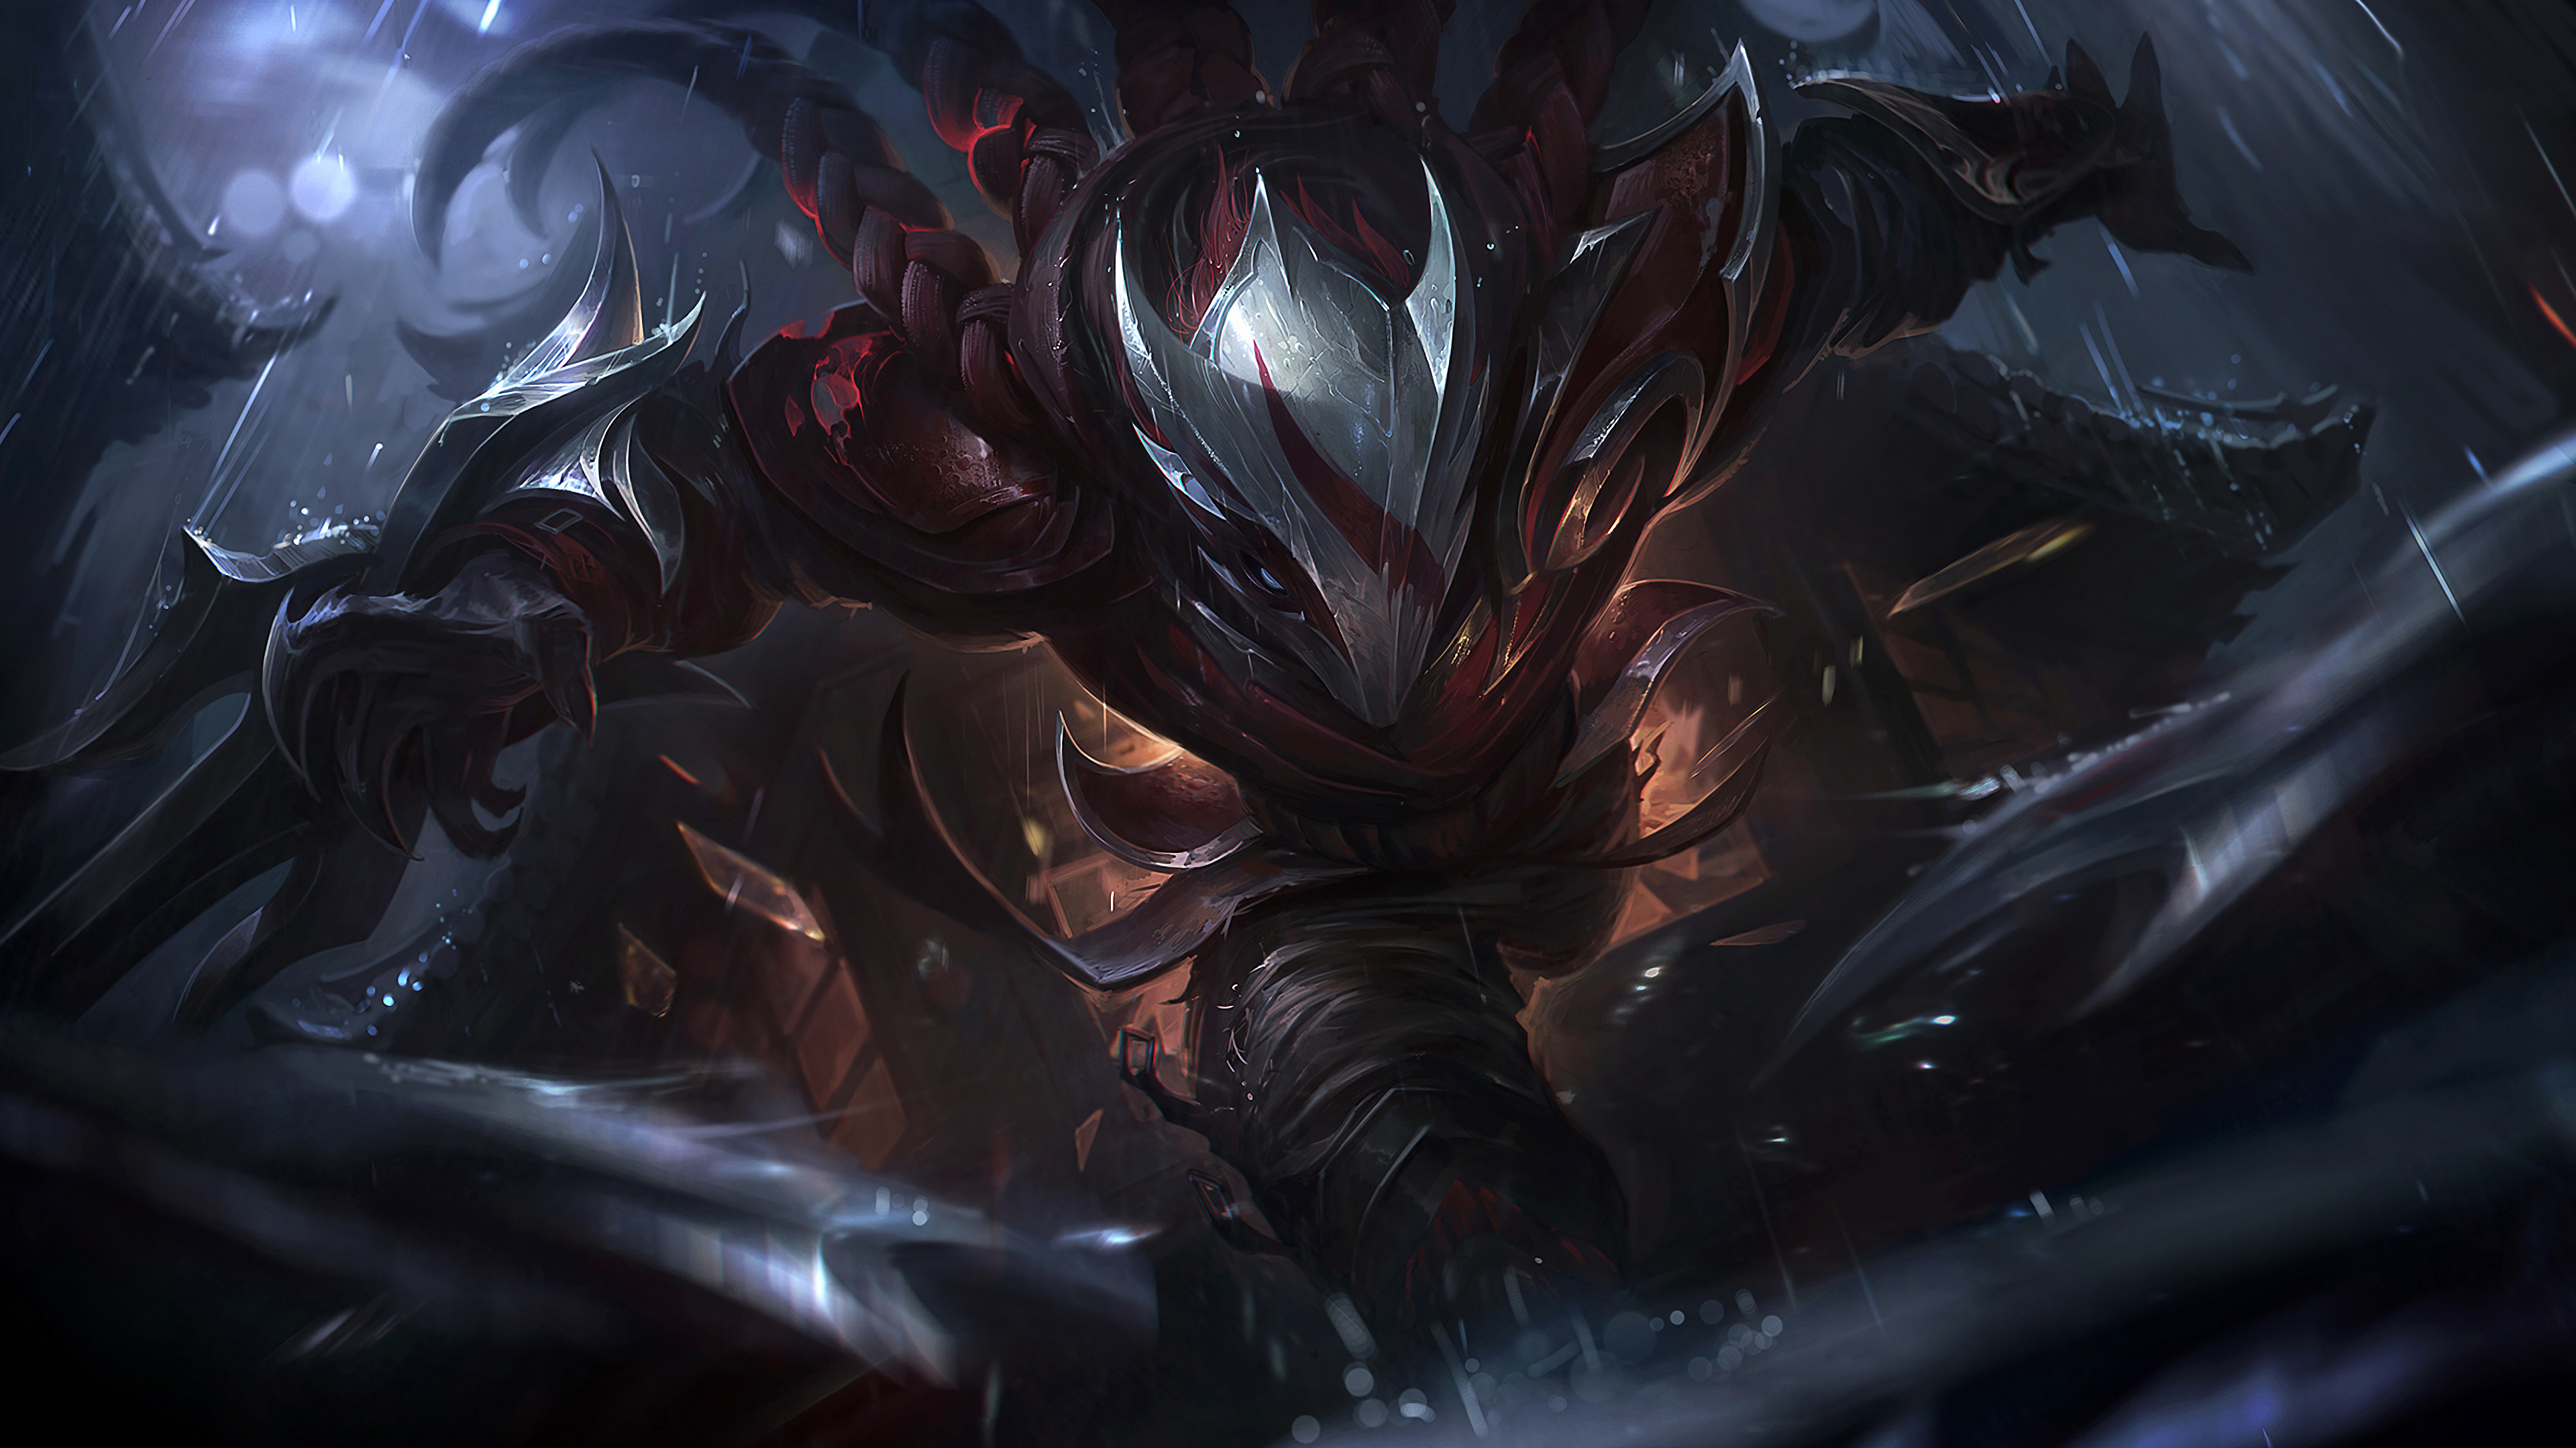 Talon LoL Wallpapers HD Wallpapers amp Artworks for League of